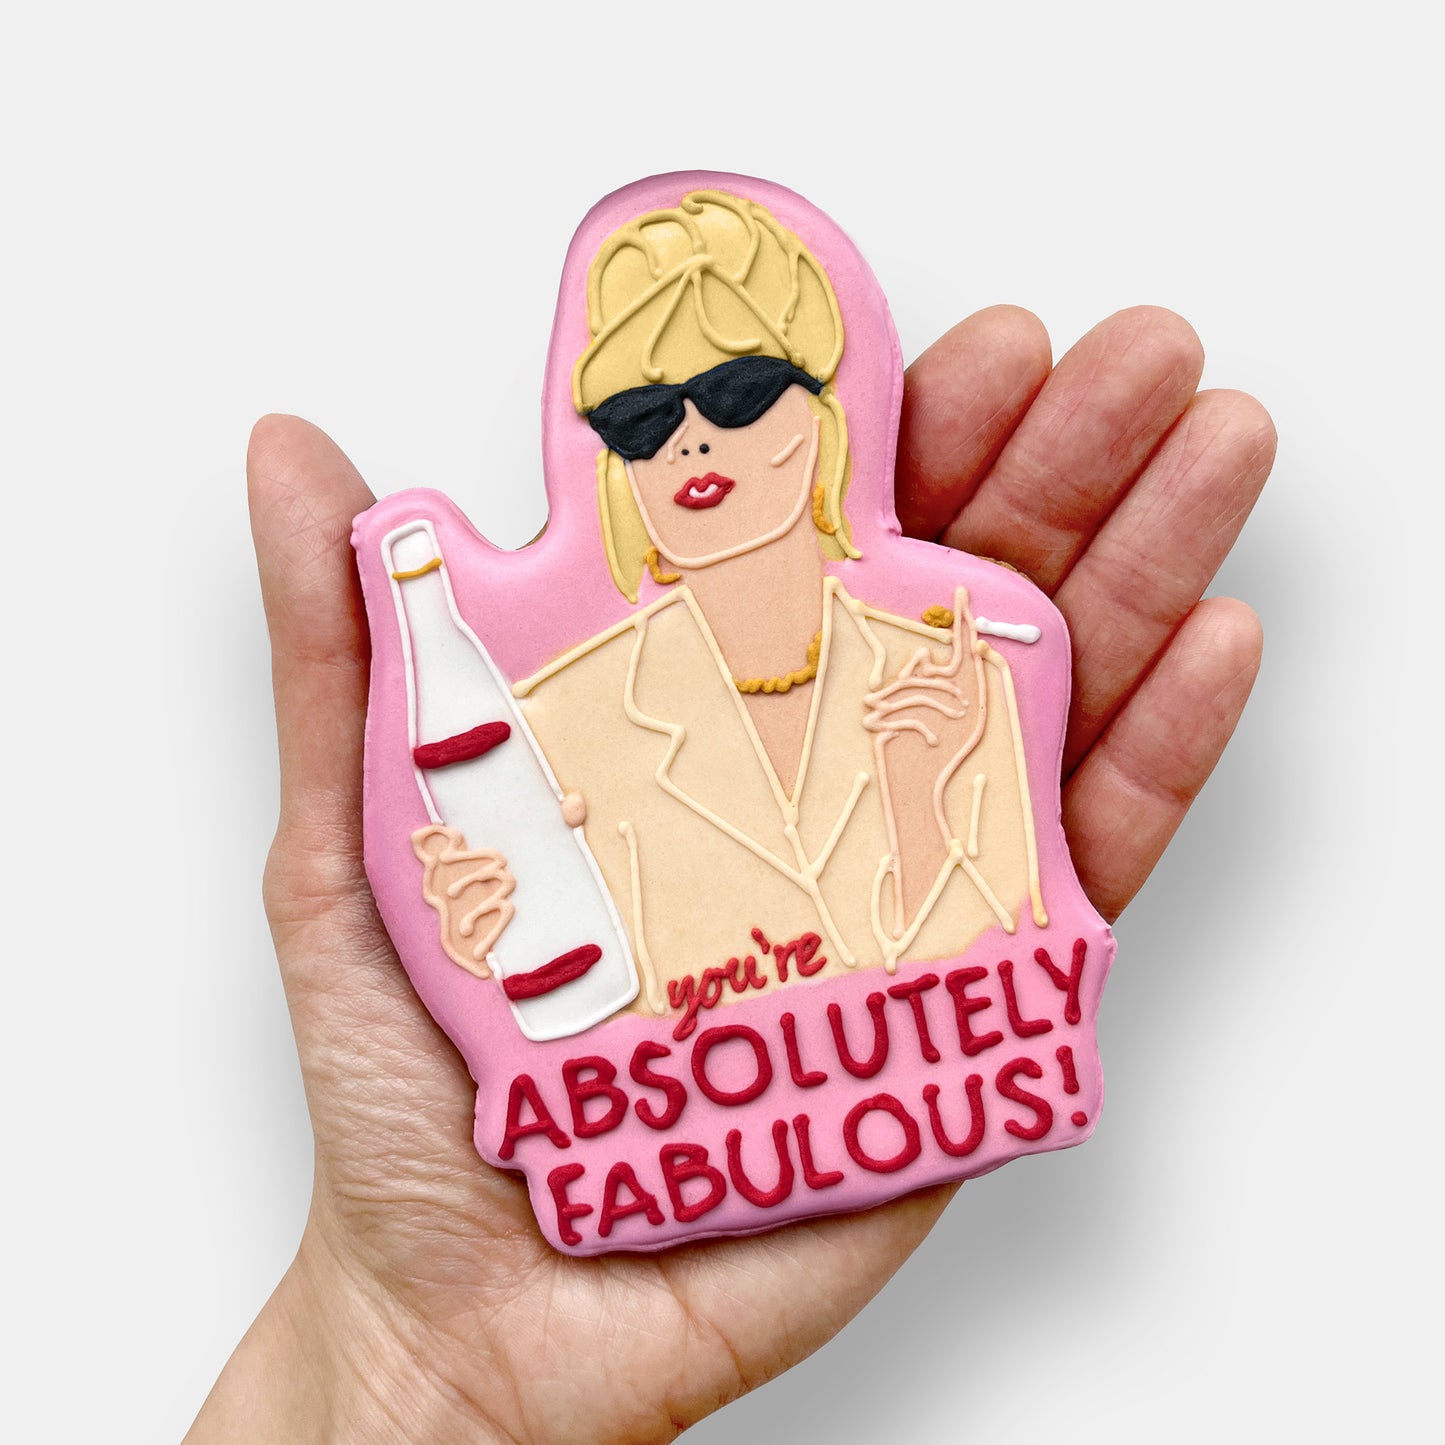 You're Absolutely Fabulous Letterbox Cookie